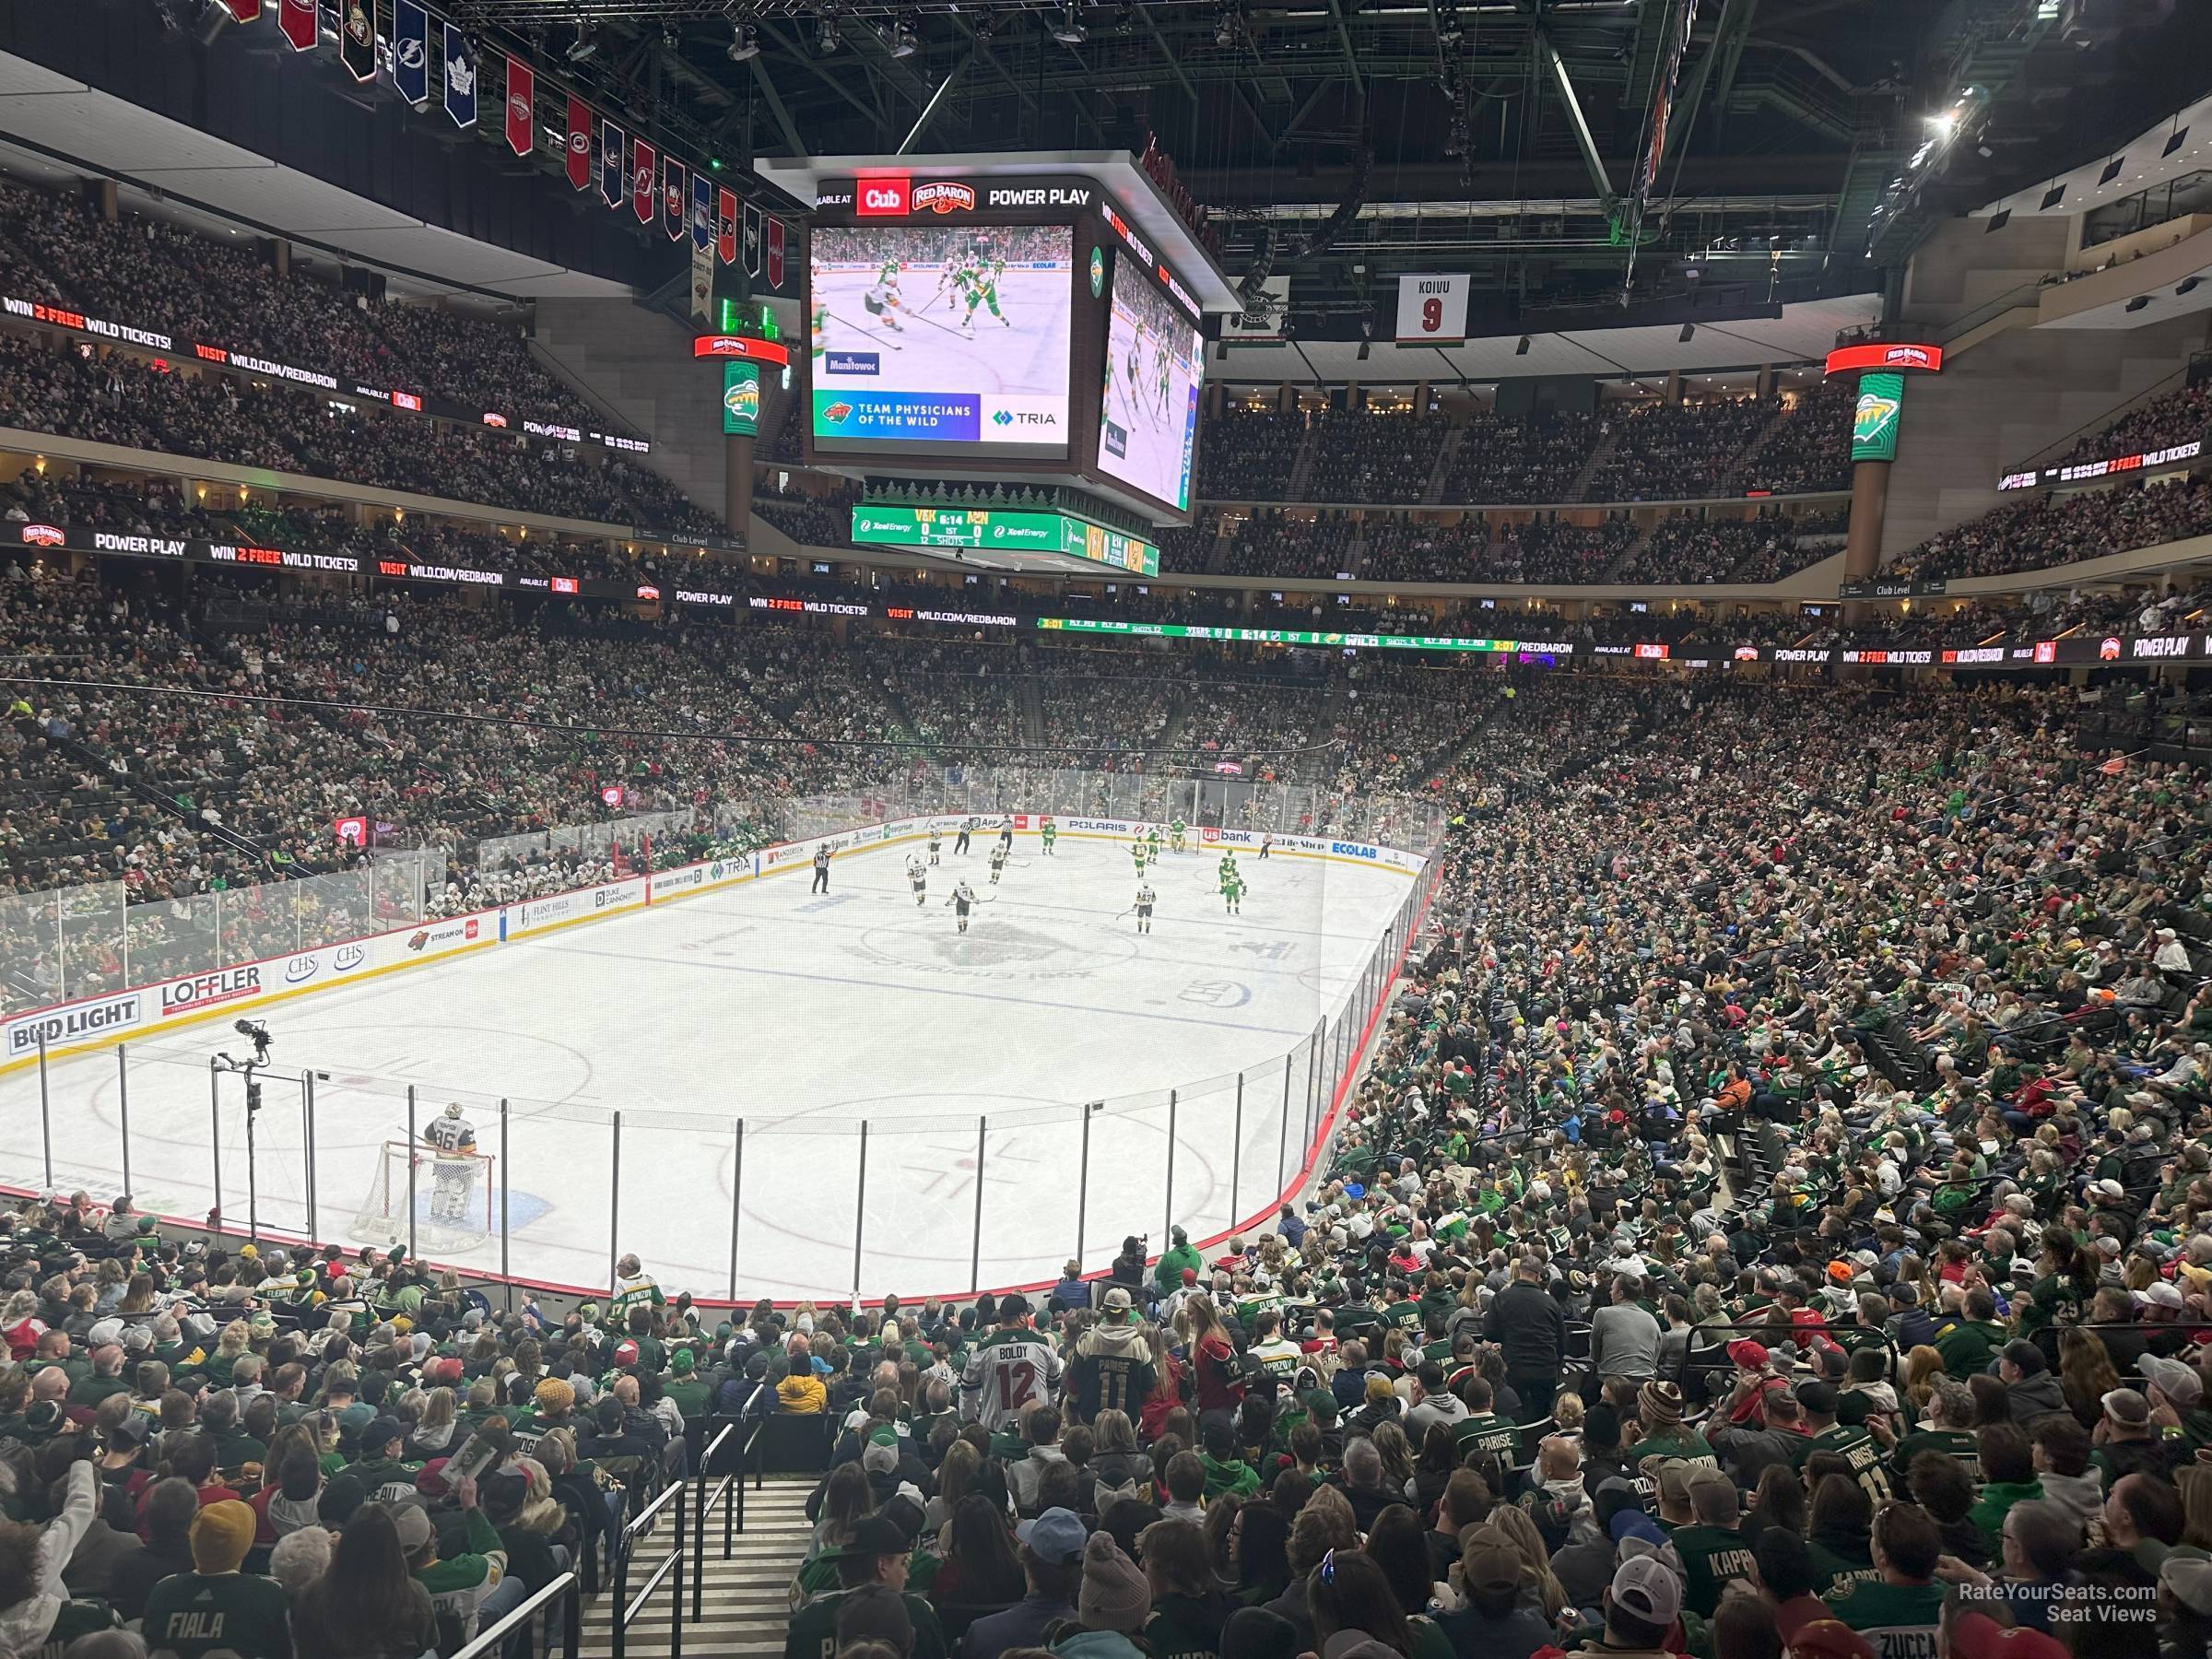 section 108, row 23 seat view  for hockey - xcel energy center